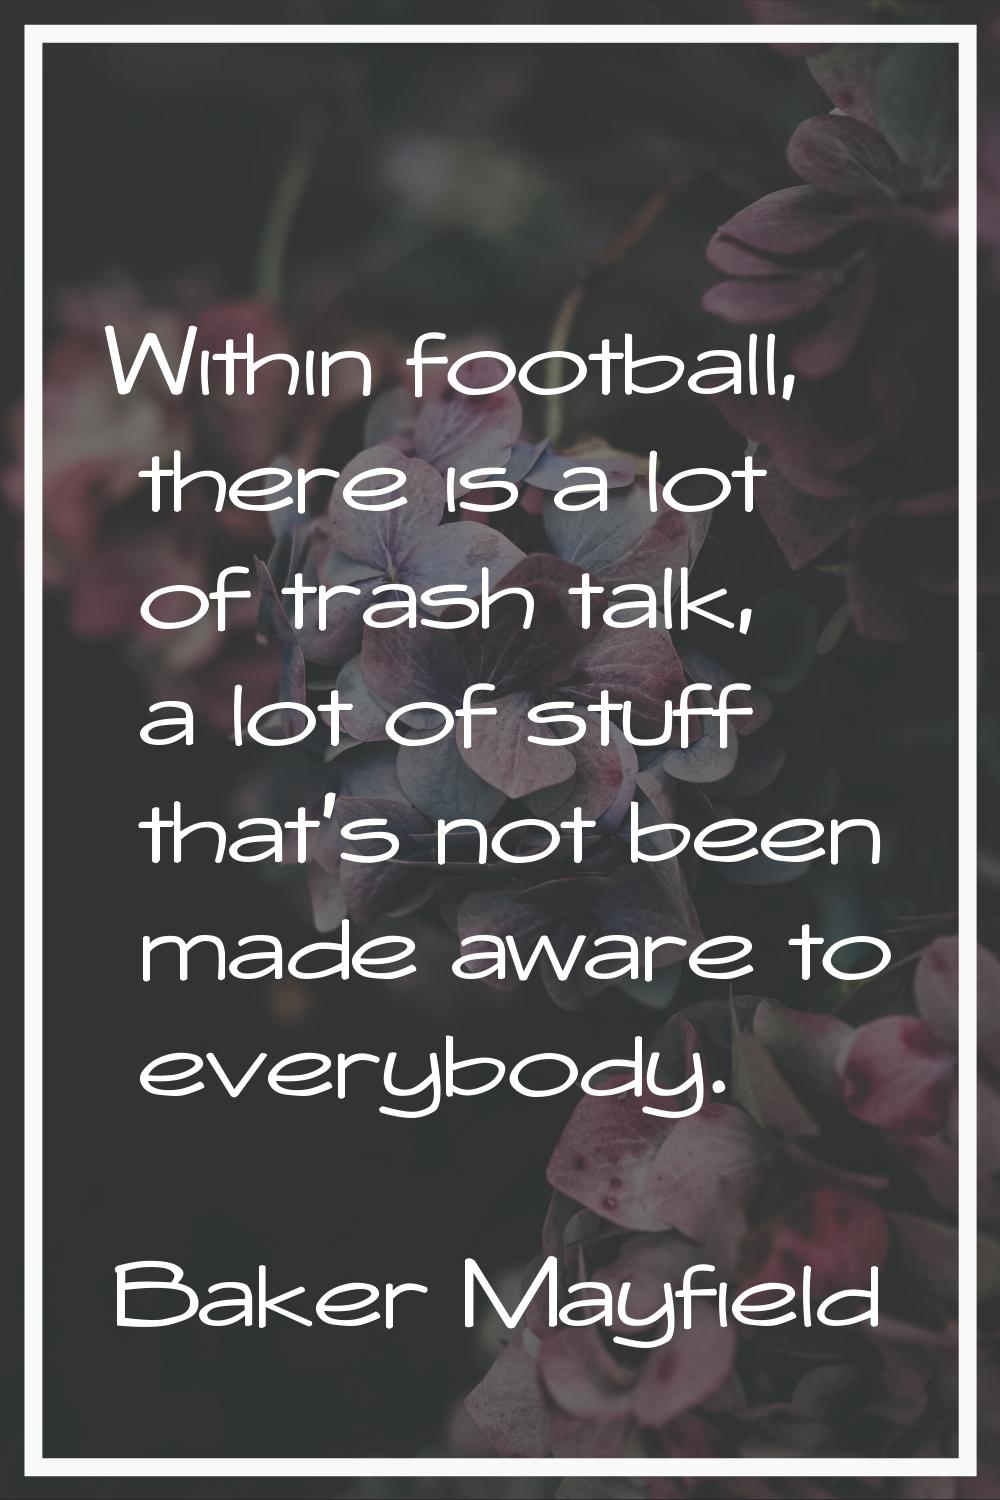 Within football, there is a lot of trash talk, a lot of stuff that's not been made aware to everybo